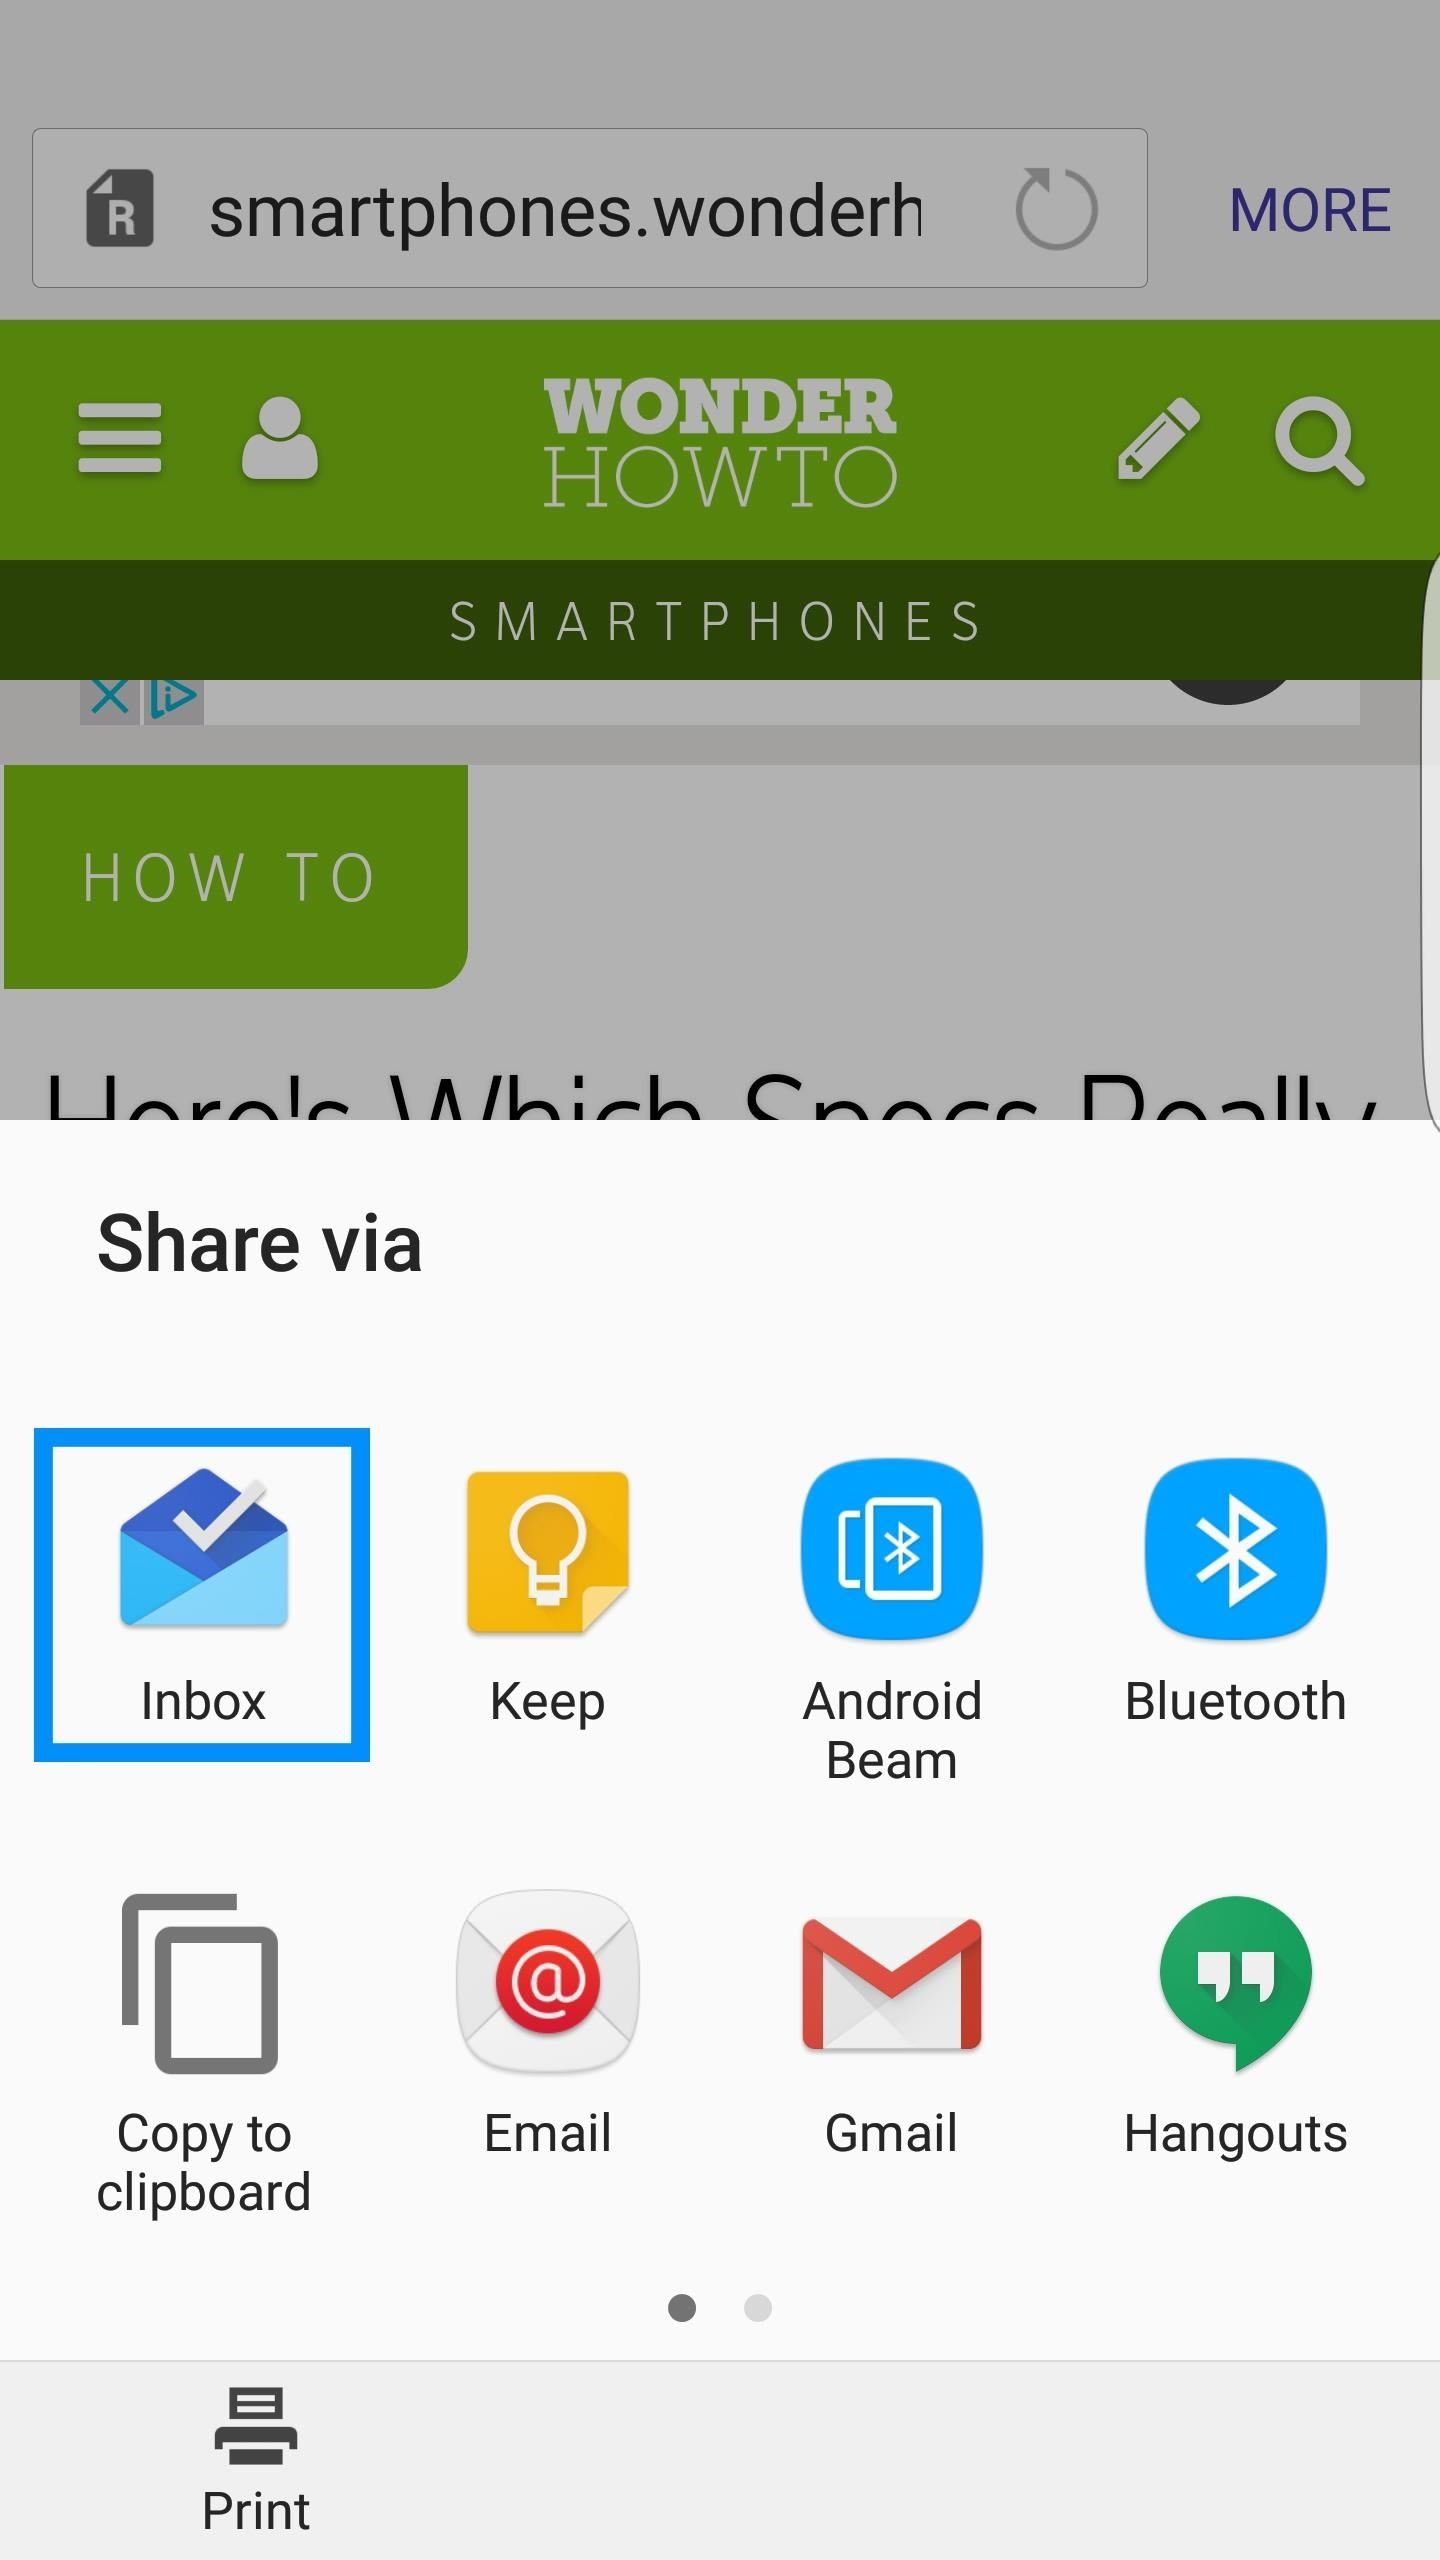 10 Reasons You Need to Switch to Google Inbox